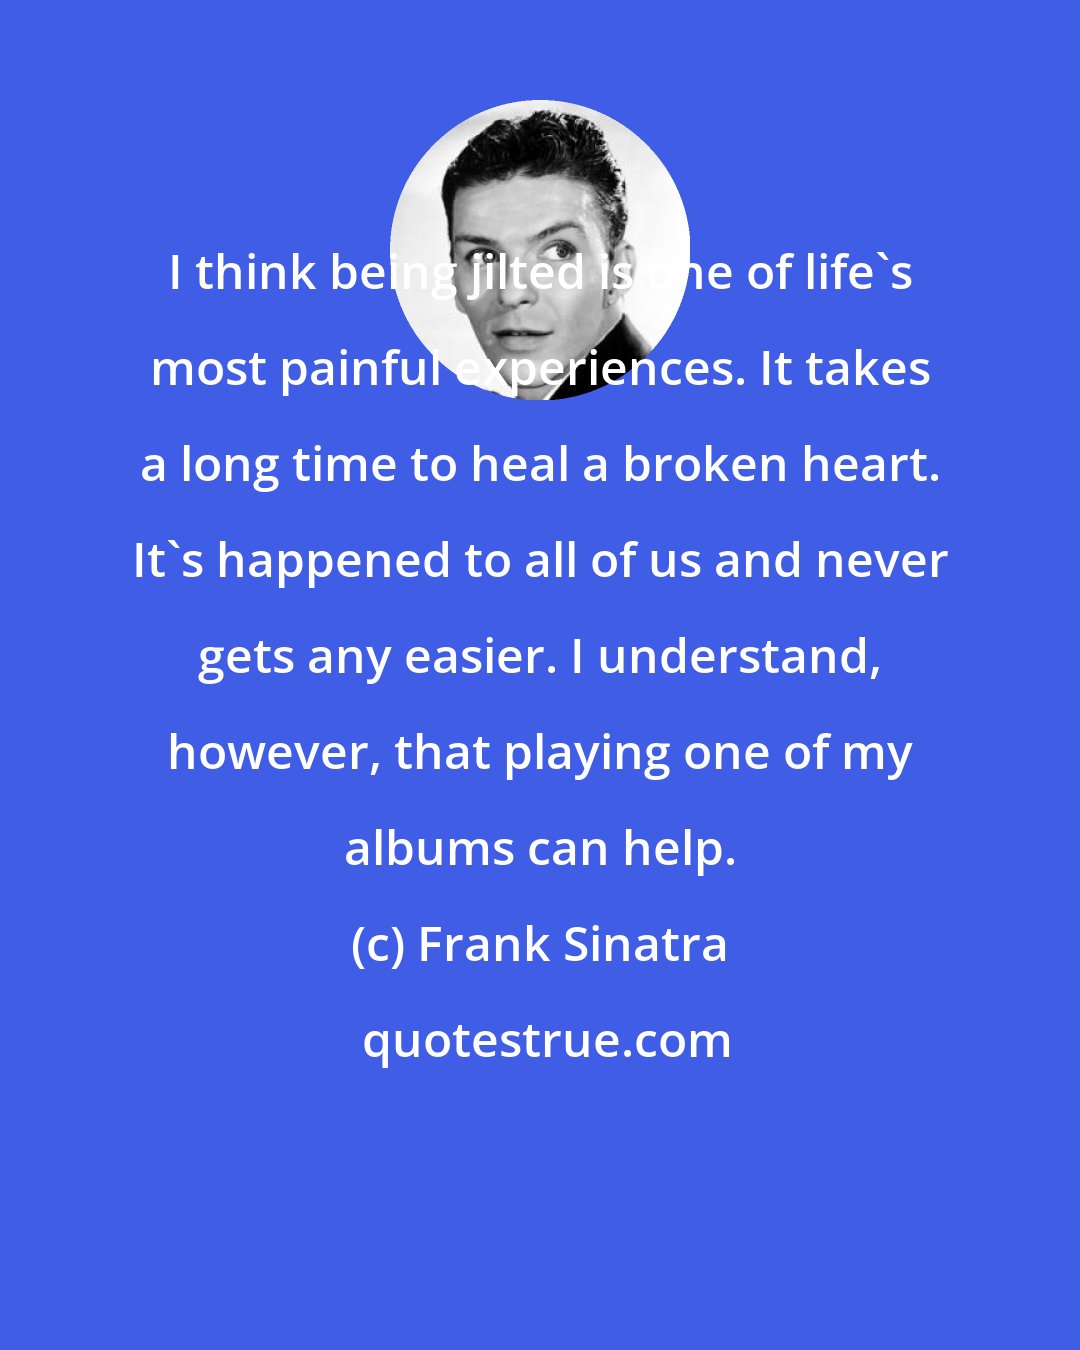 Frank Sinatra: I think being jilted is one of life's most painful experiences. It takes a long time to heal a broken heart. It's happened to all of us and never gets any easier. I understand, however, that playing one of my albums can help.